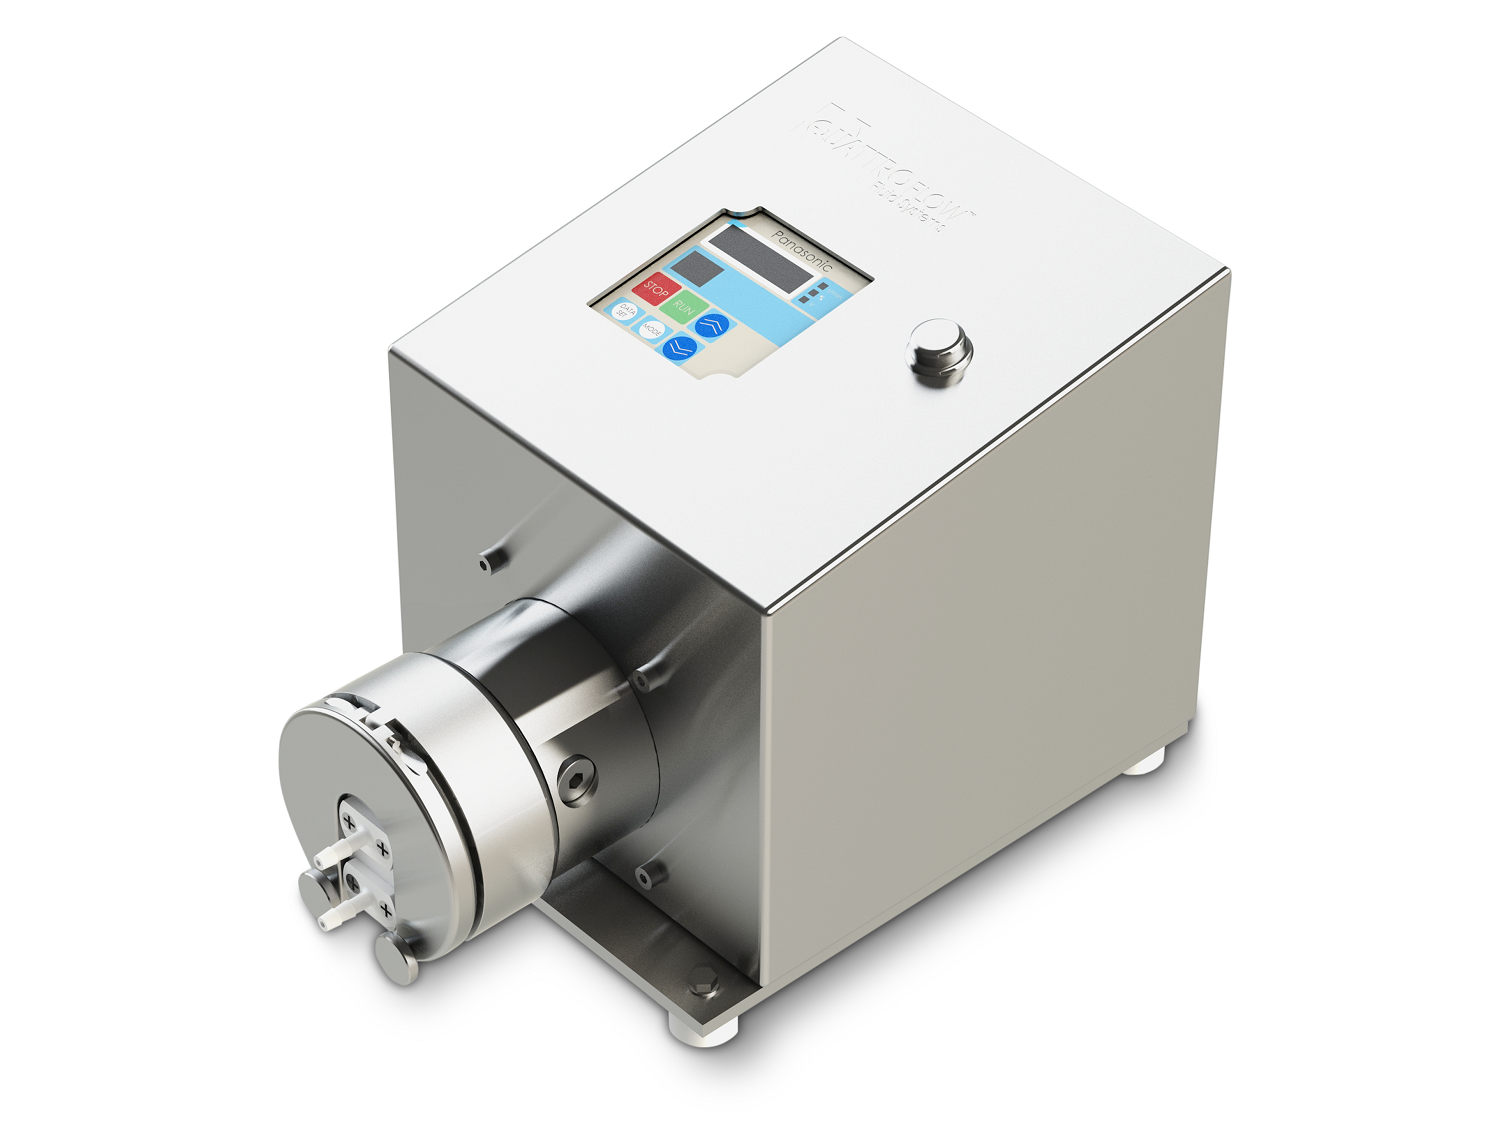 Quattroflow's single-use pumps primarily serve the biotech and pharmaceutical industries.